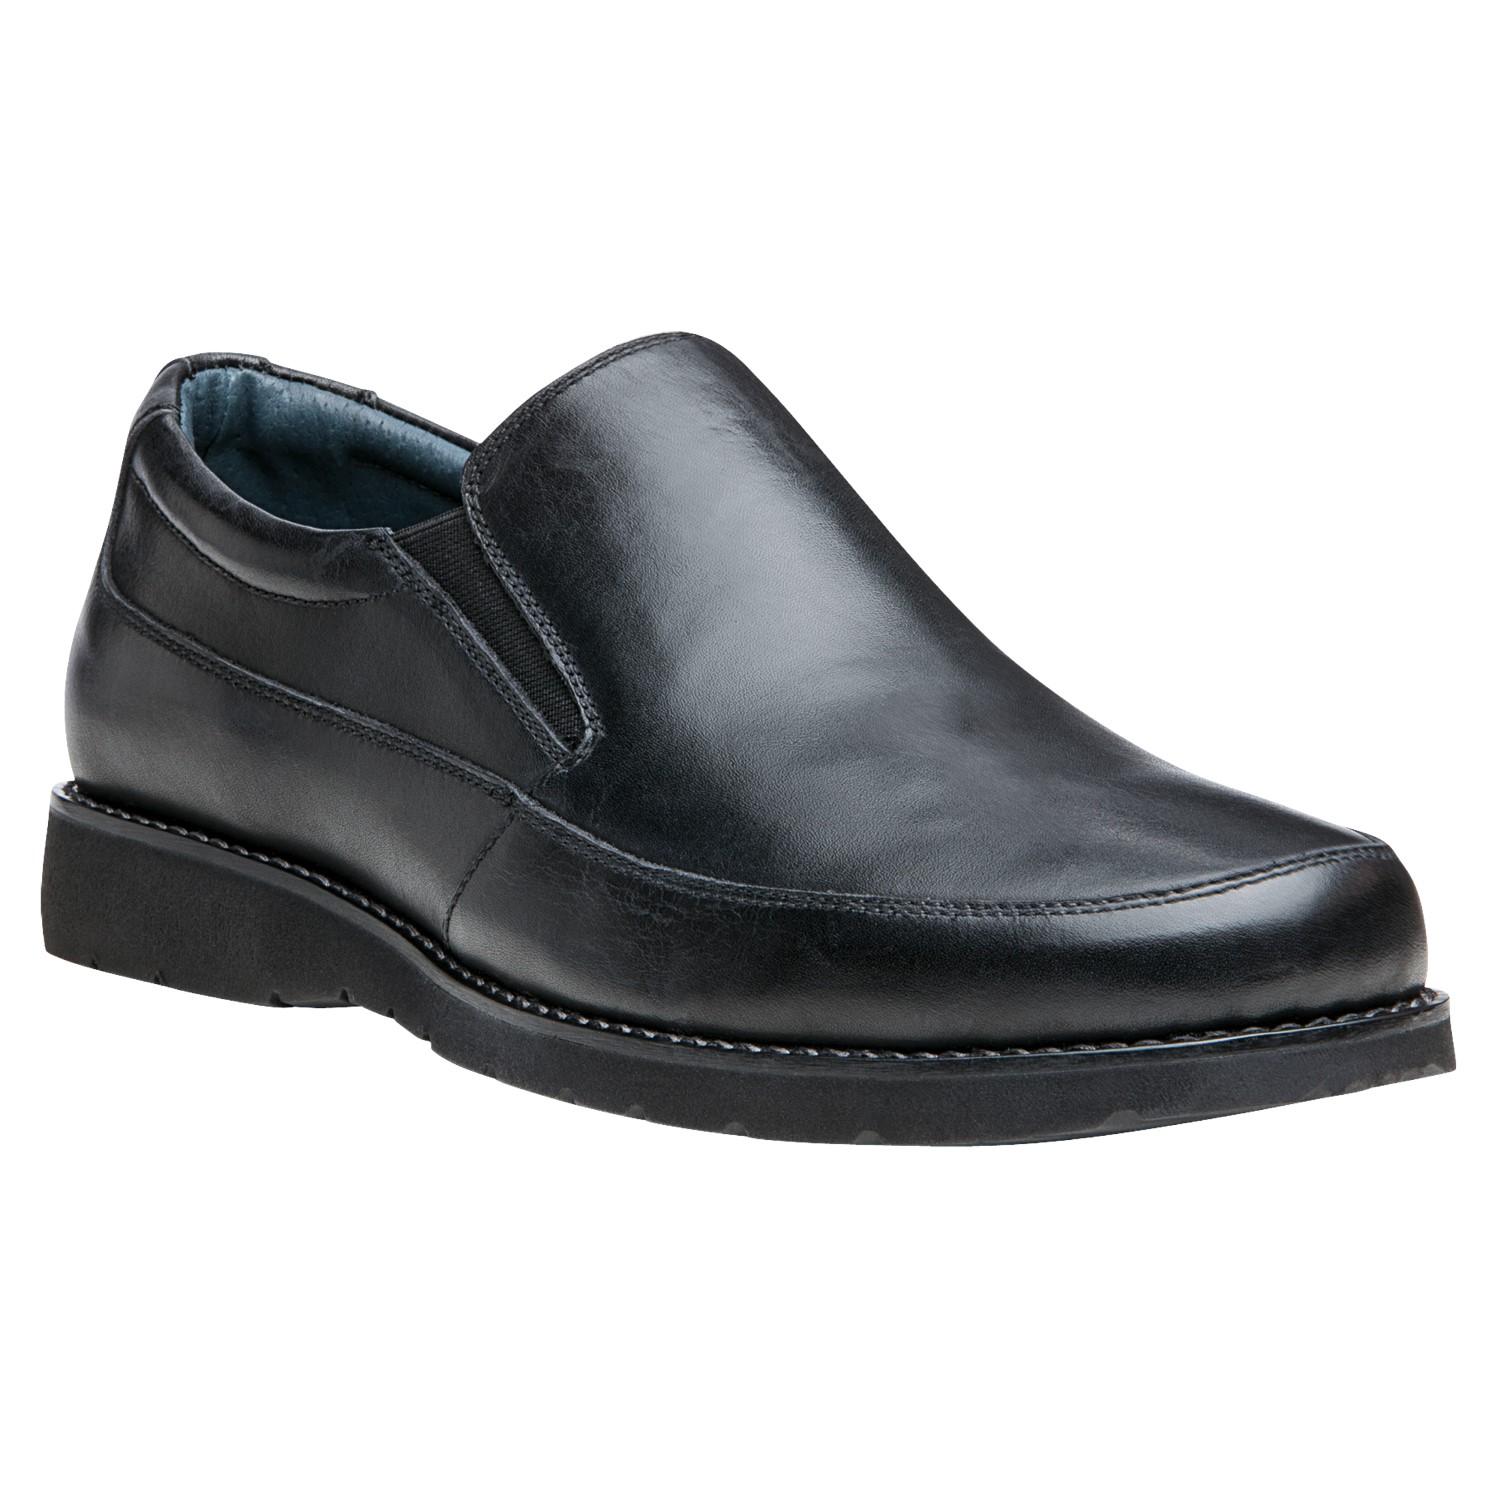 casual comfortable dress shoes